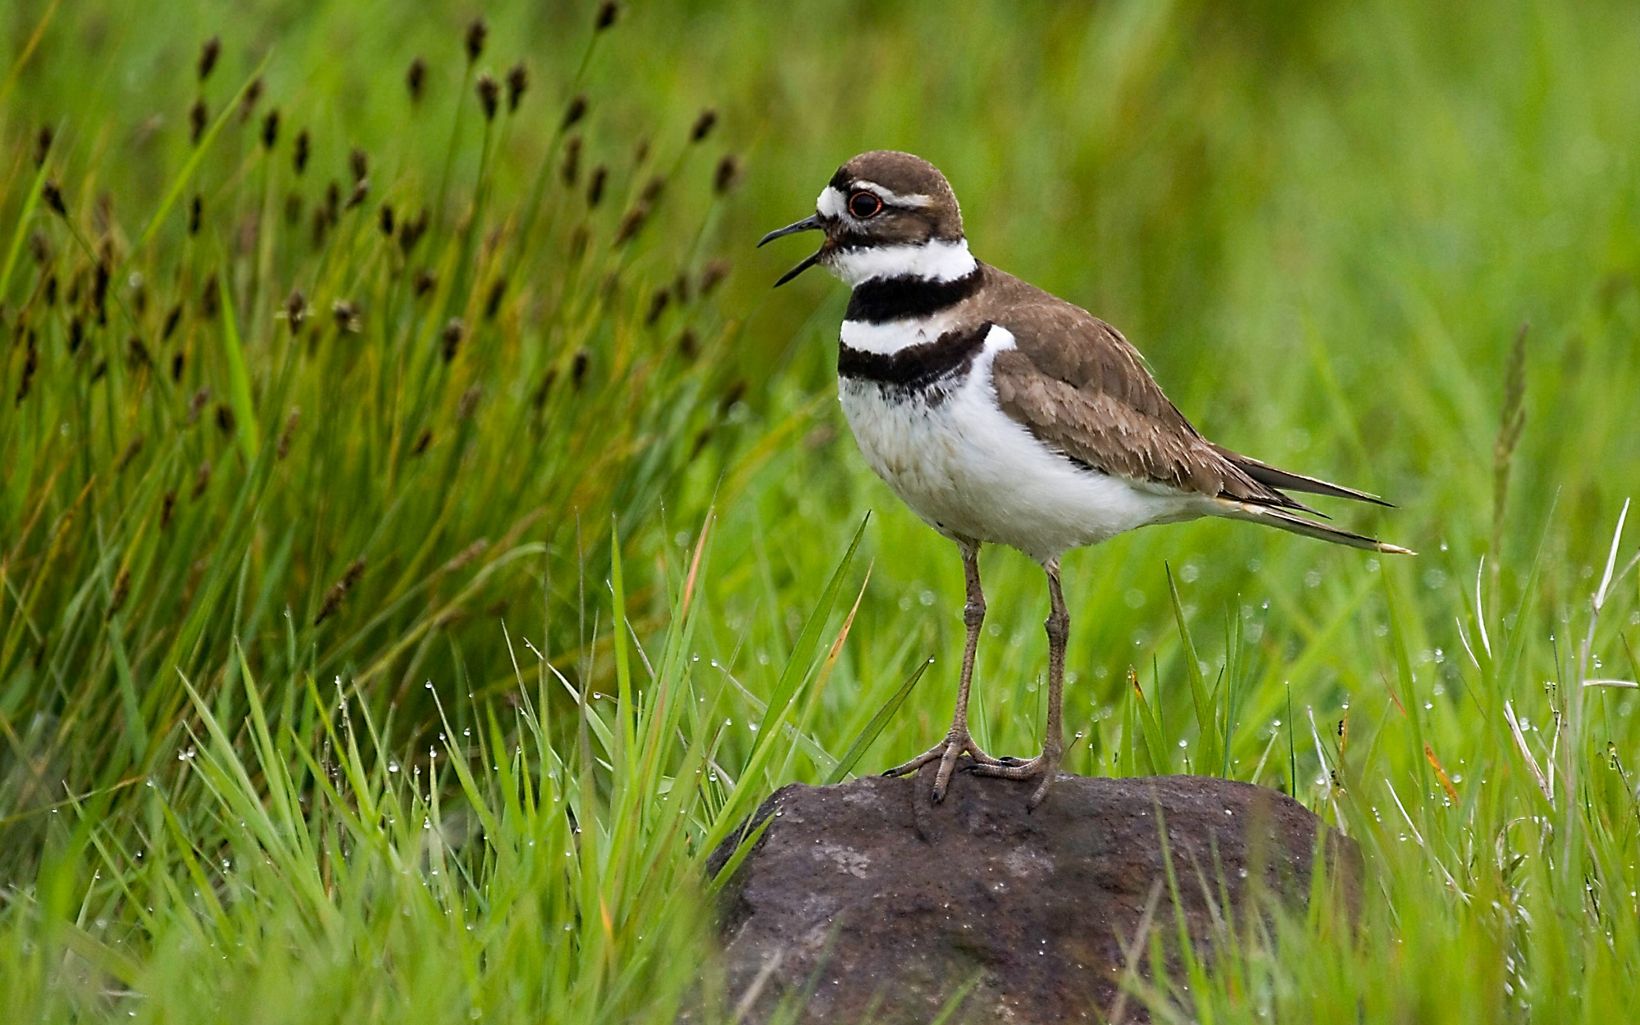 Brown and white bird with two black stripes at neck and chest stands on a small rock in a field of grass.